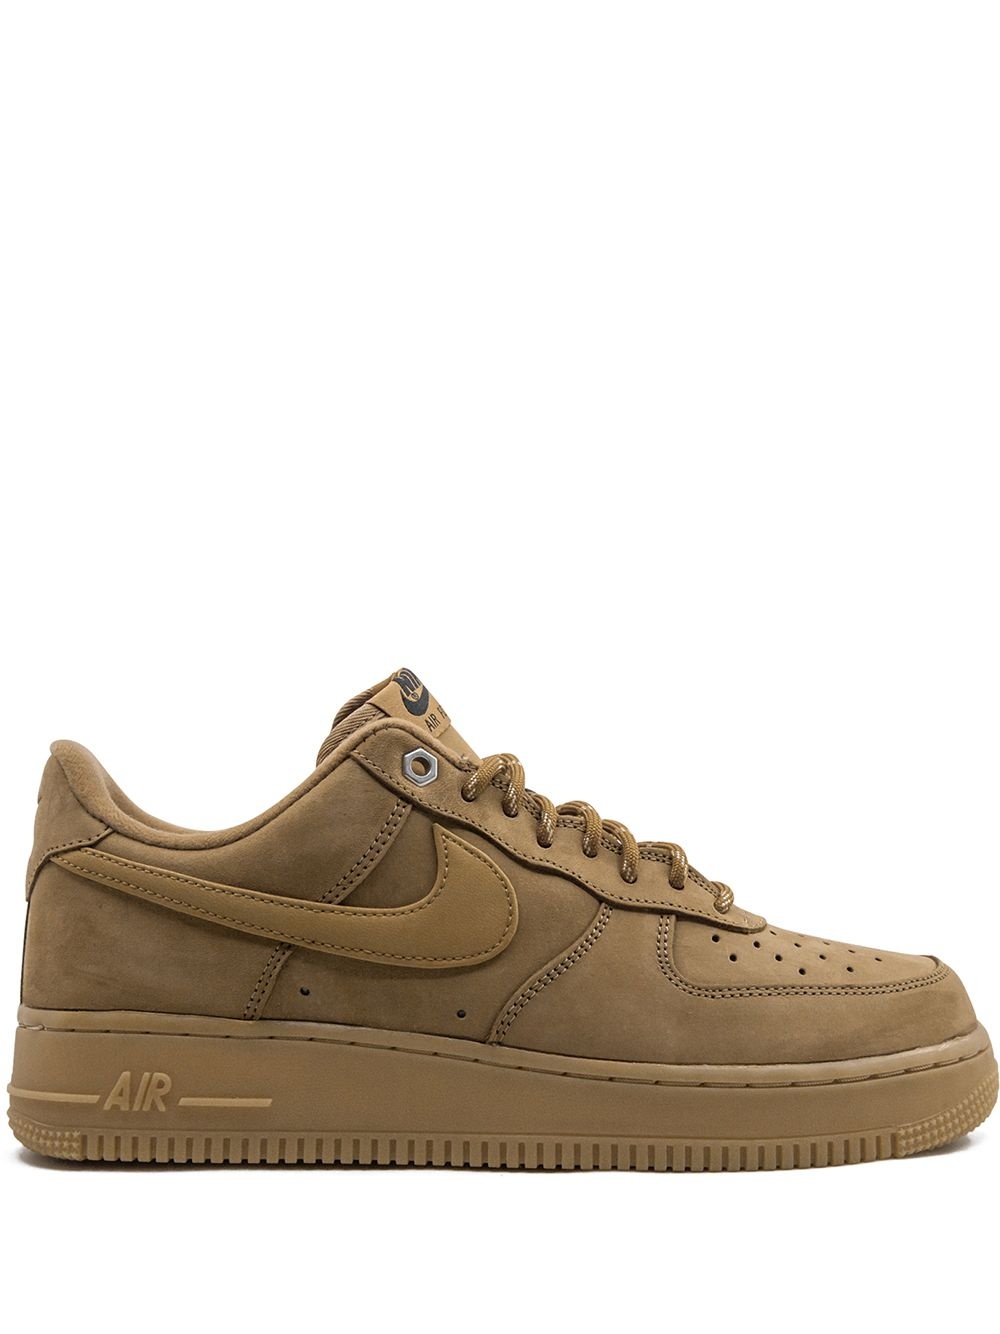 Air Force 1 '07 WB "Flax" sneakers - 1